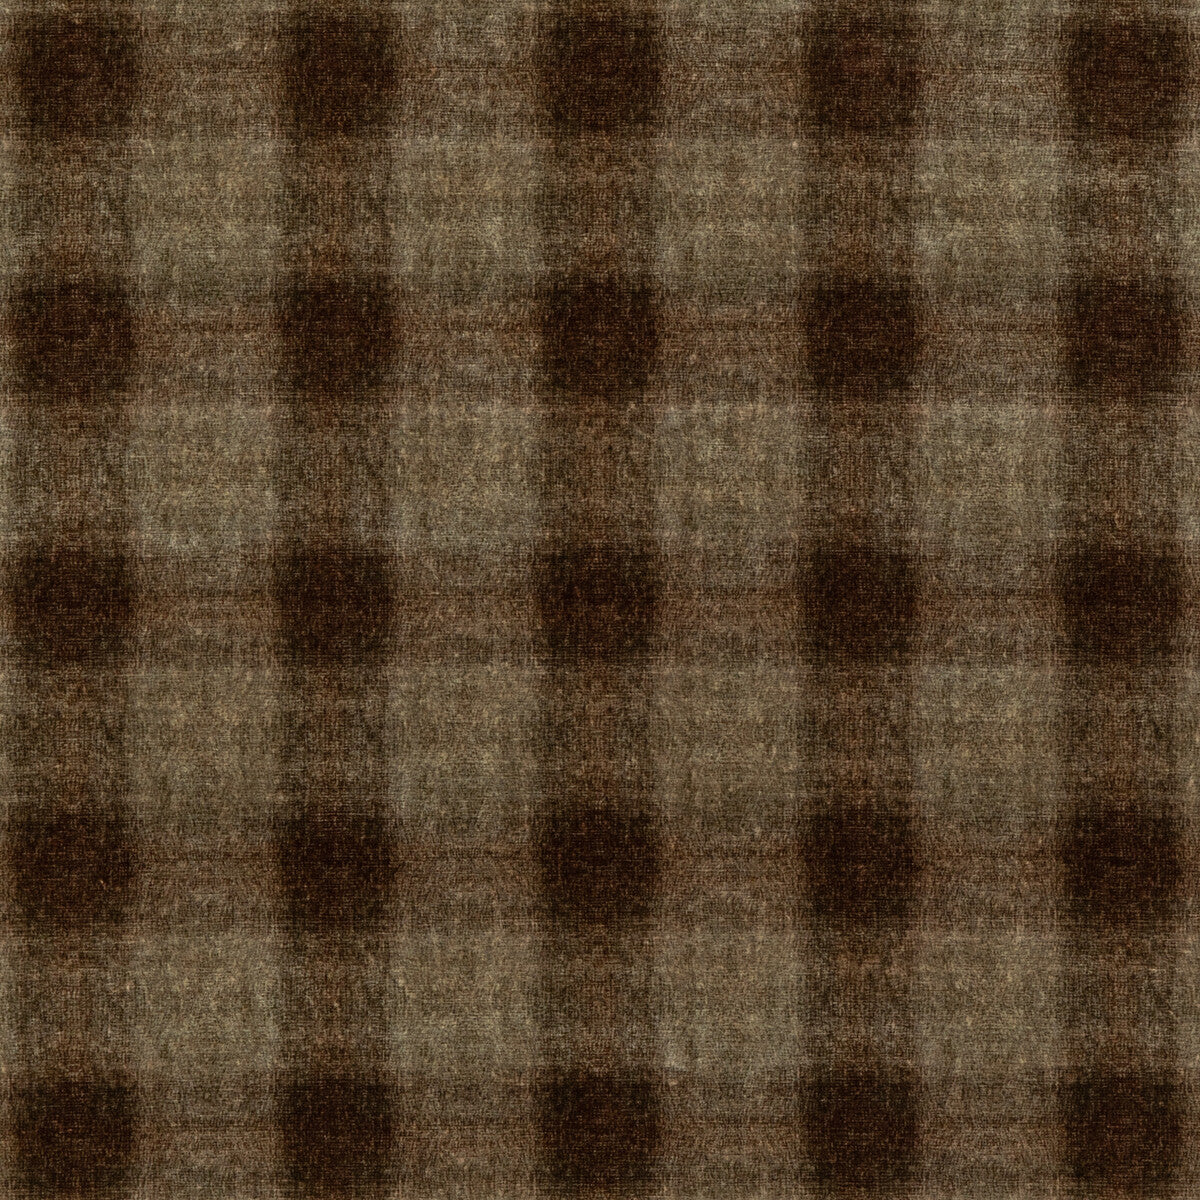 Highland Check fabric in woodsmoke color - pattern FD314.A101.0 - by Mulberry in the Modern Country Velvets collection